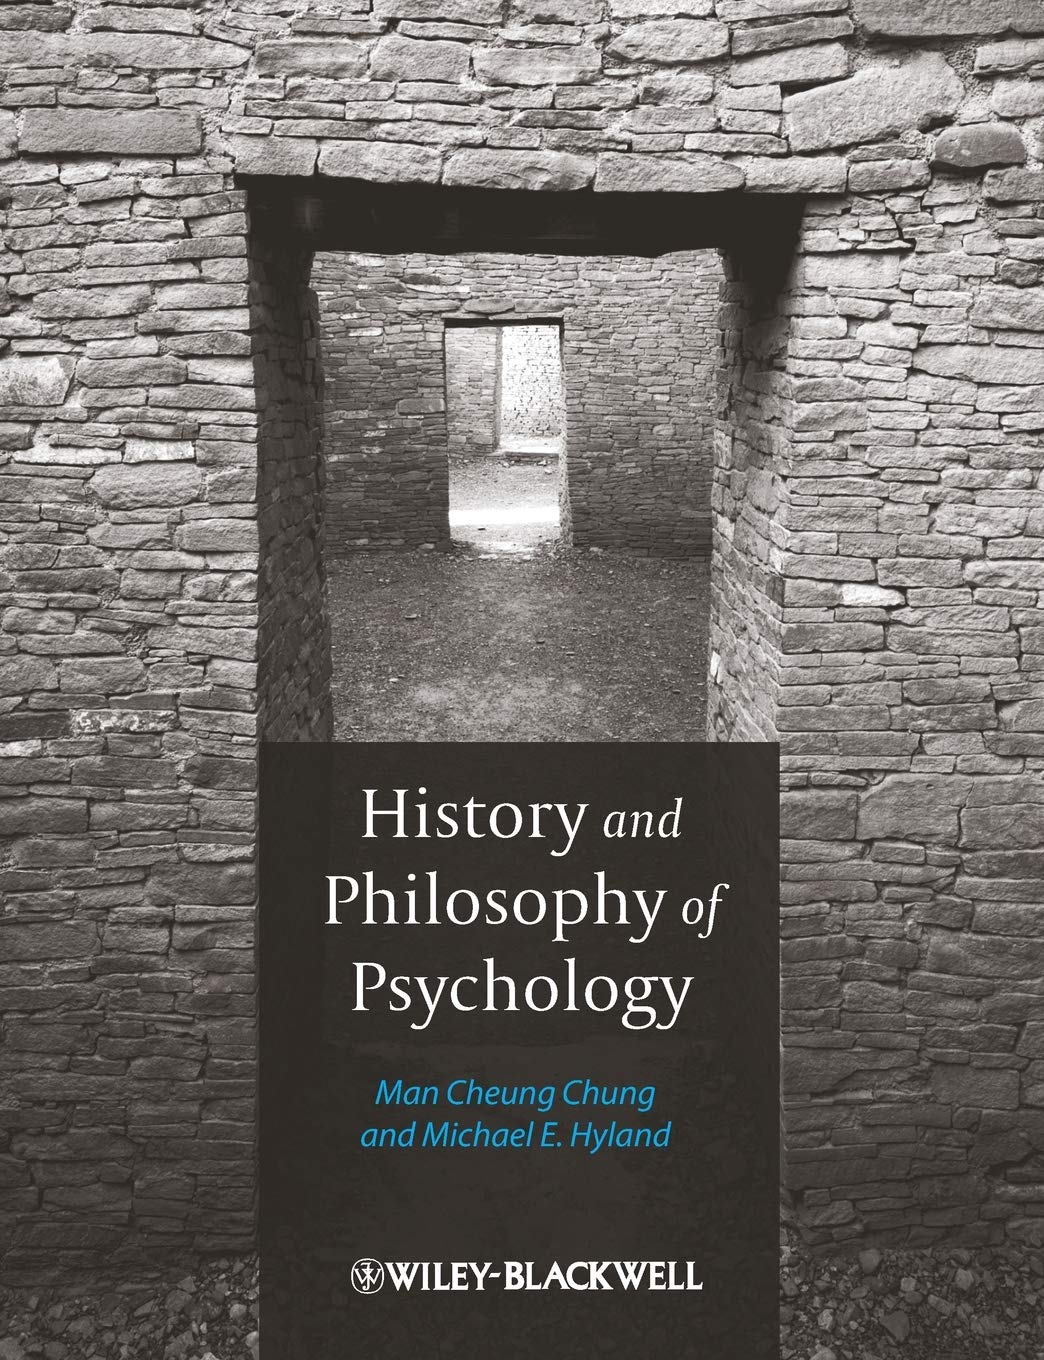 History and Philosophy of Psychology